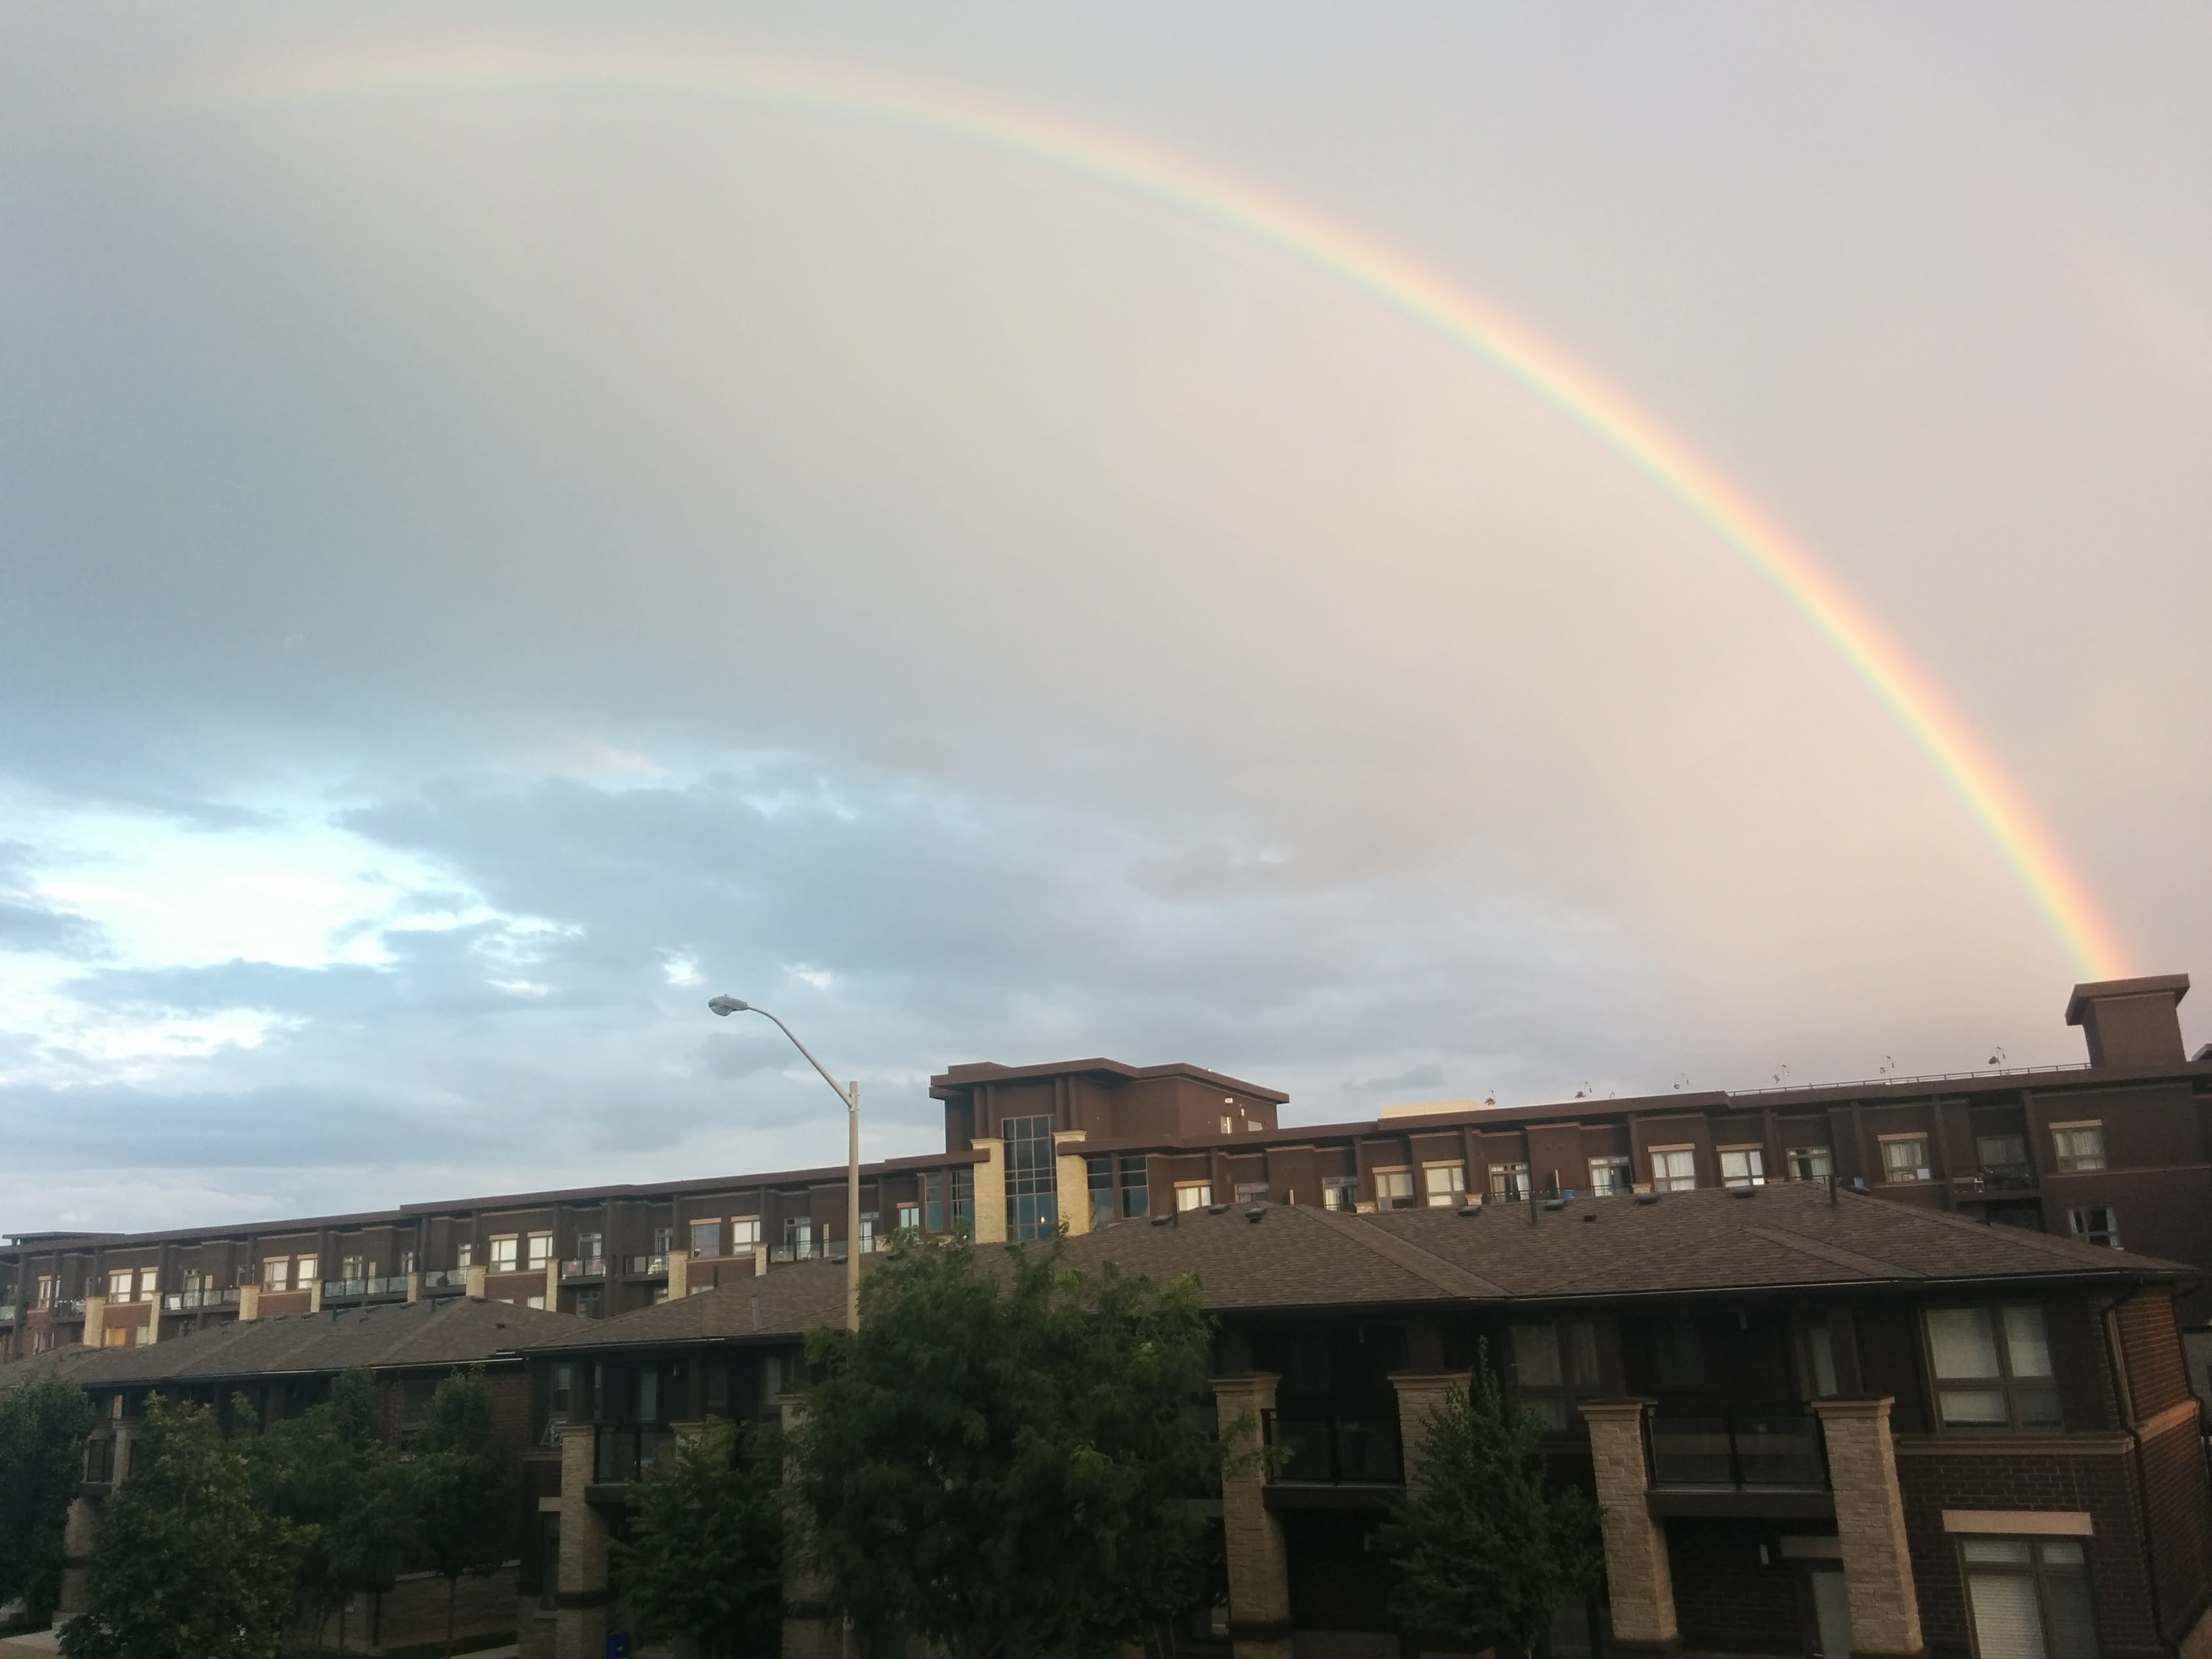 Rainbows in Fall, Rainbows over Bldg. Rainbows are for everyone.